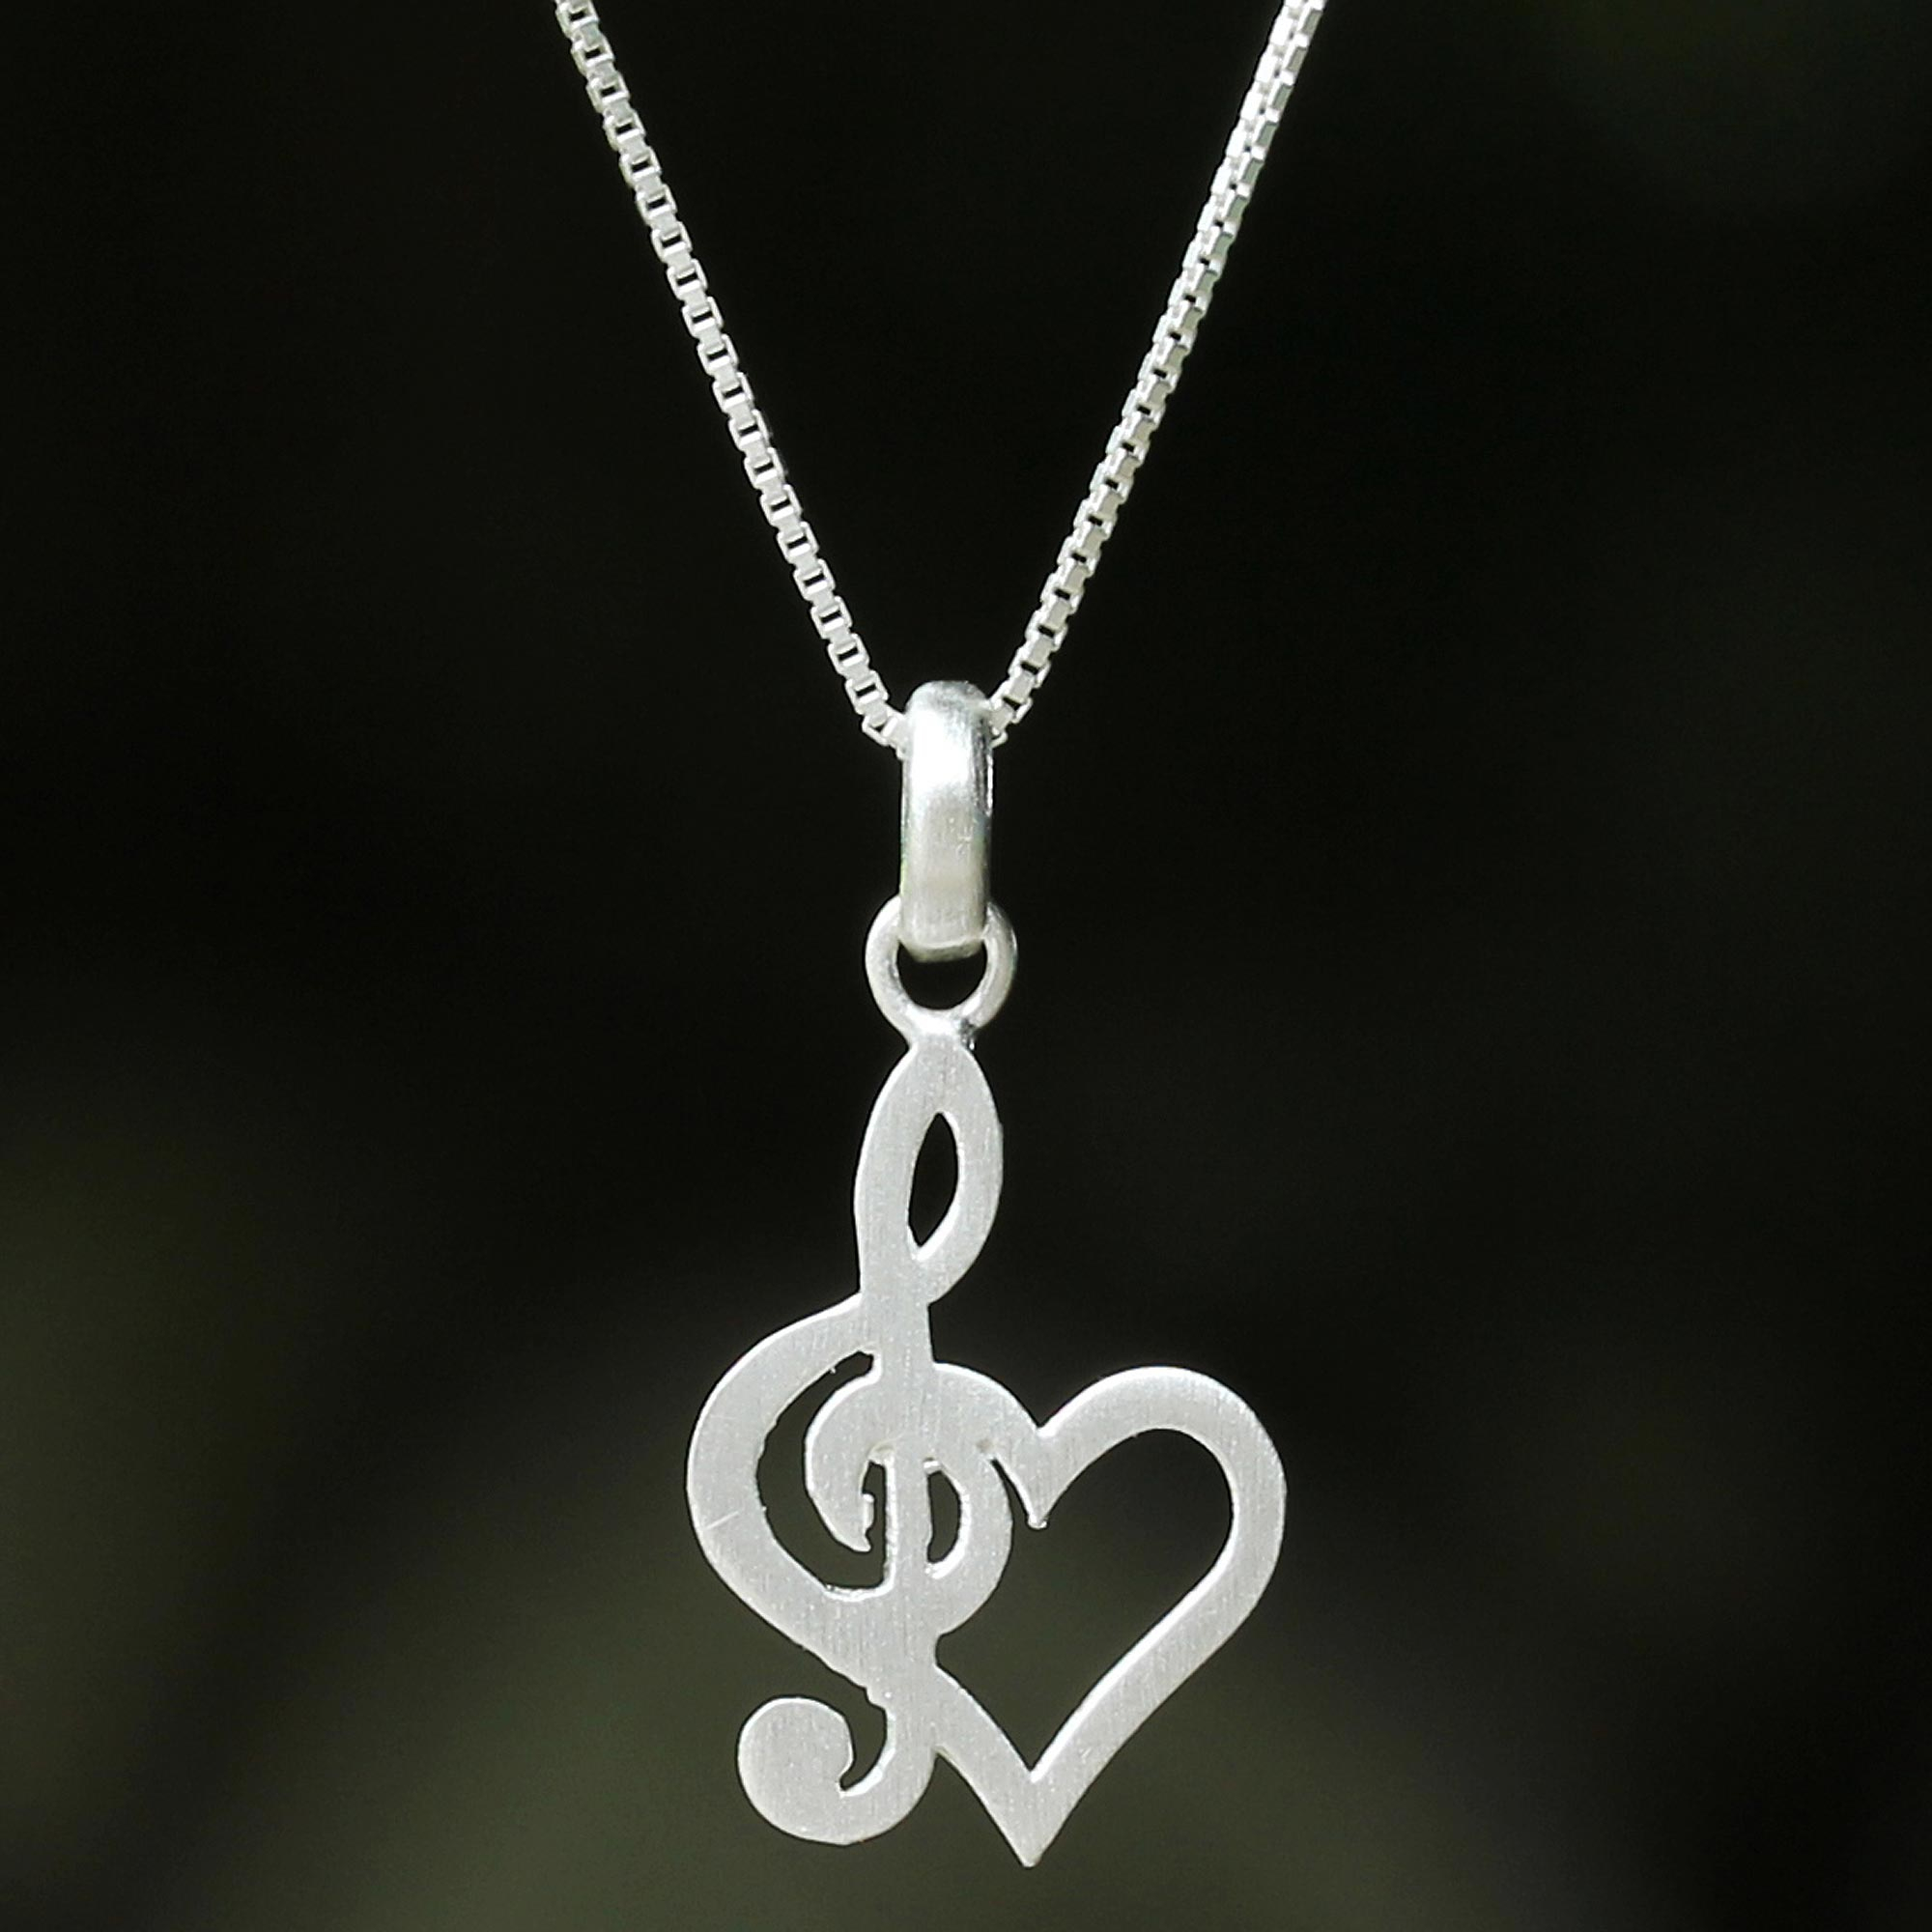 New Love Heart Treble Clef Music Note Elegant Silver Plated Pendant Necklace UK